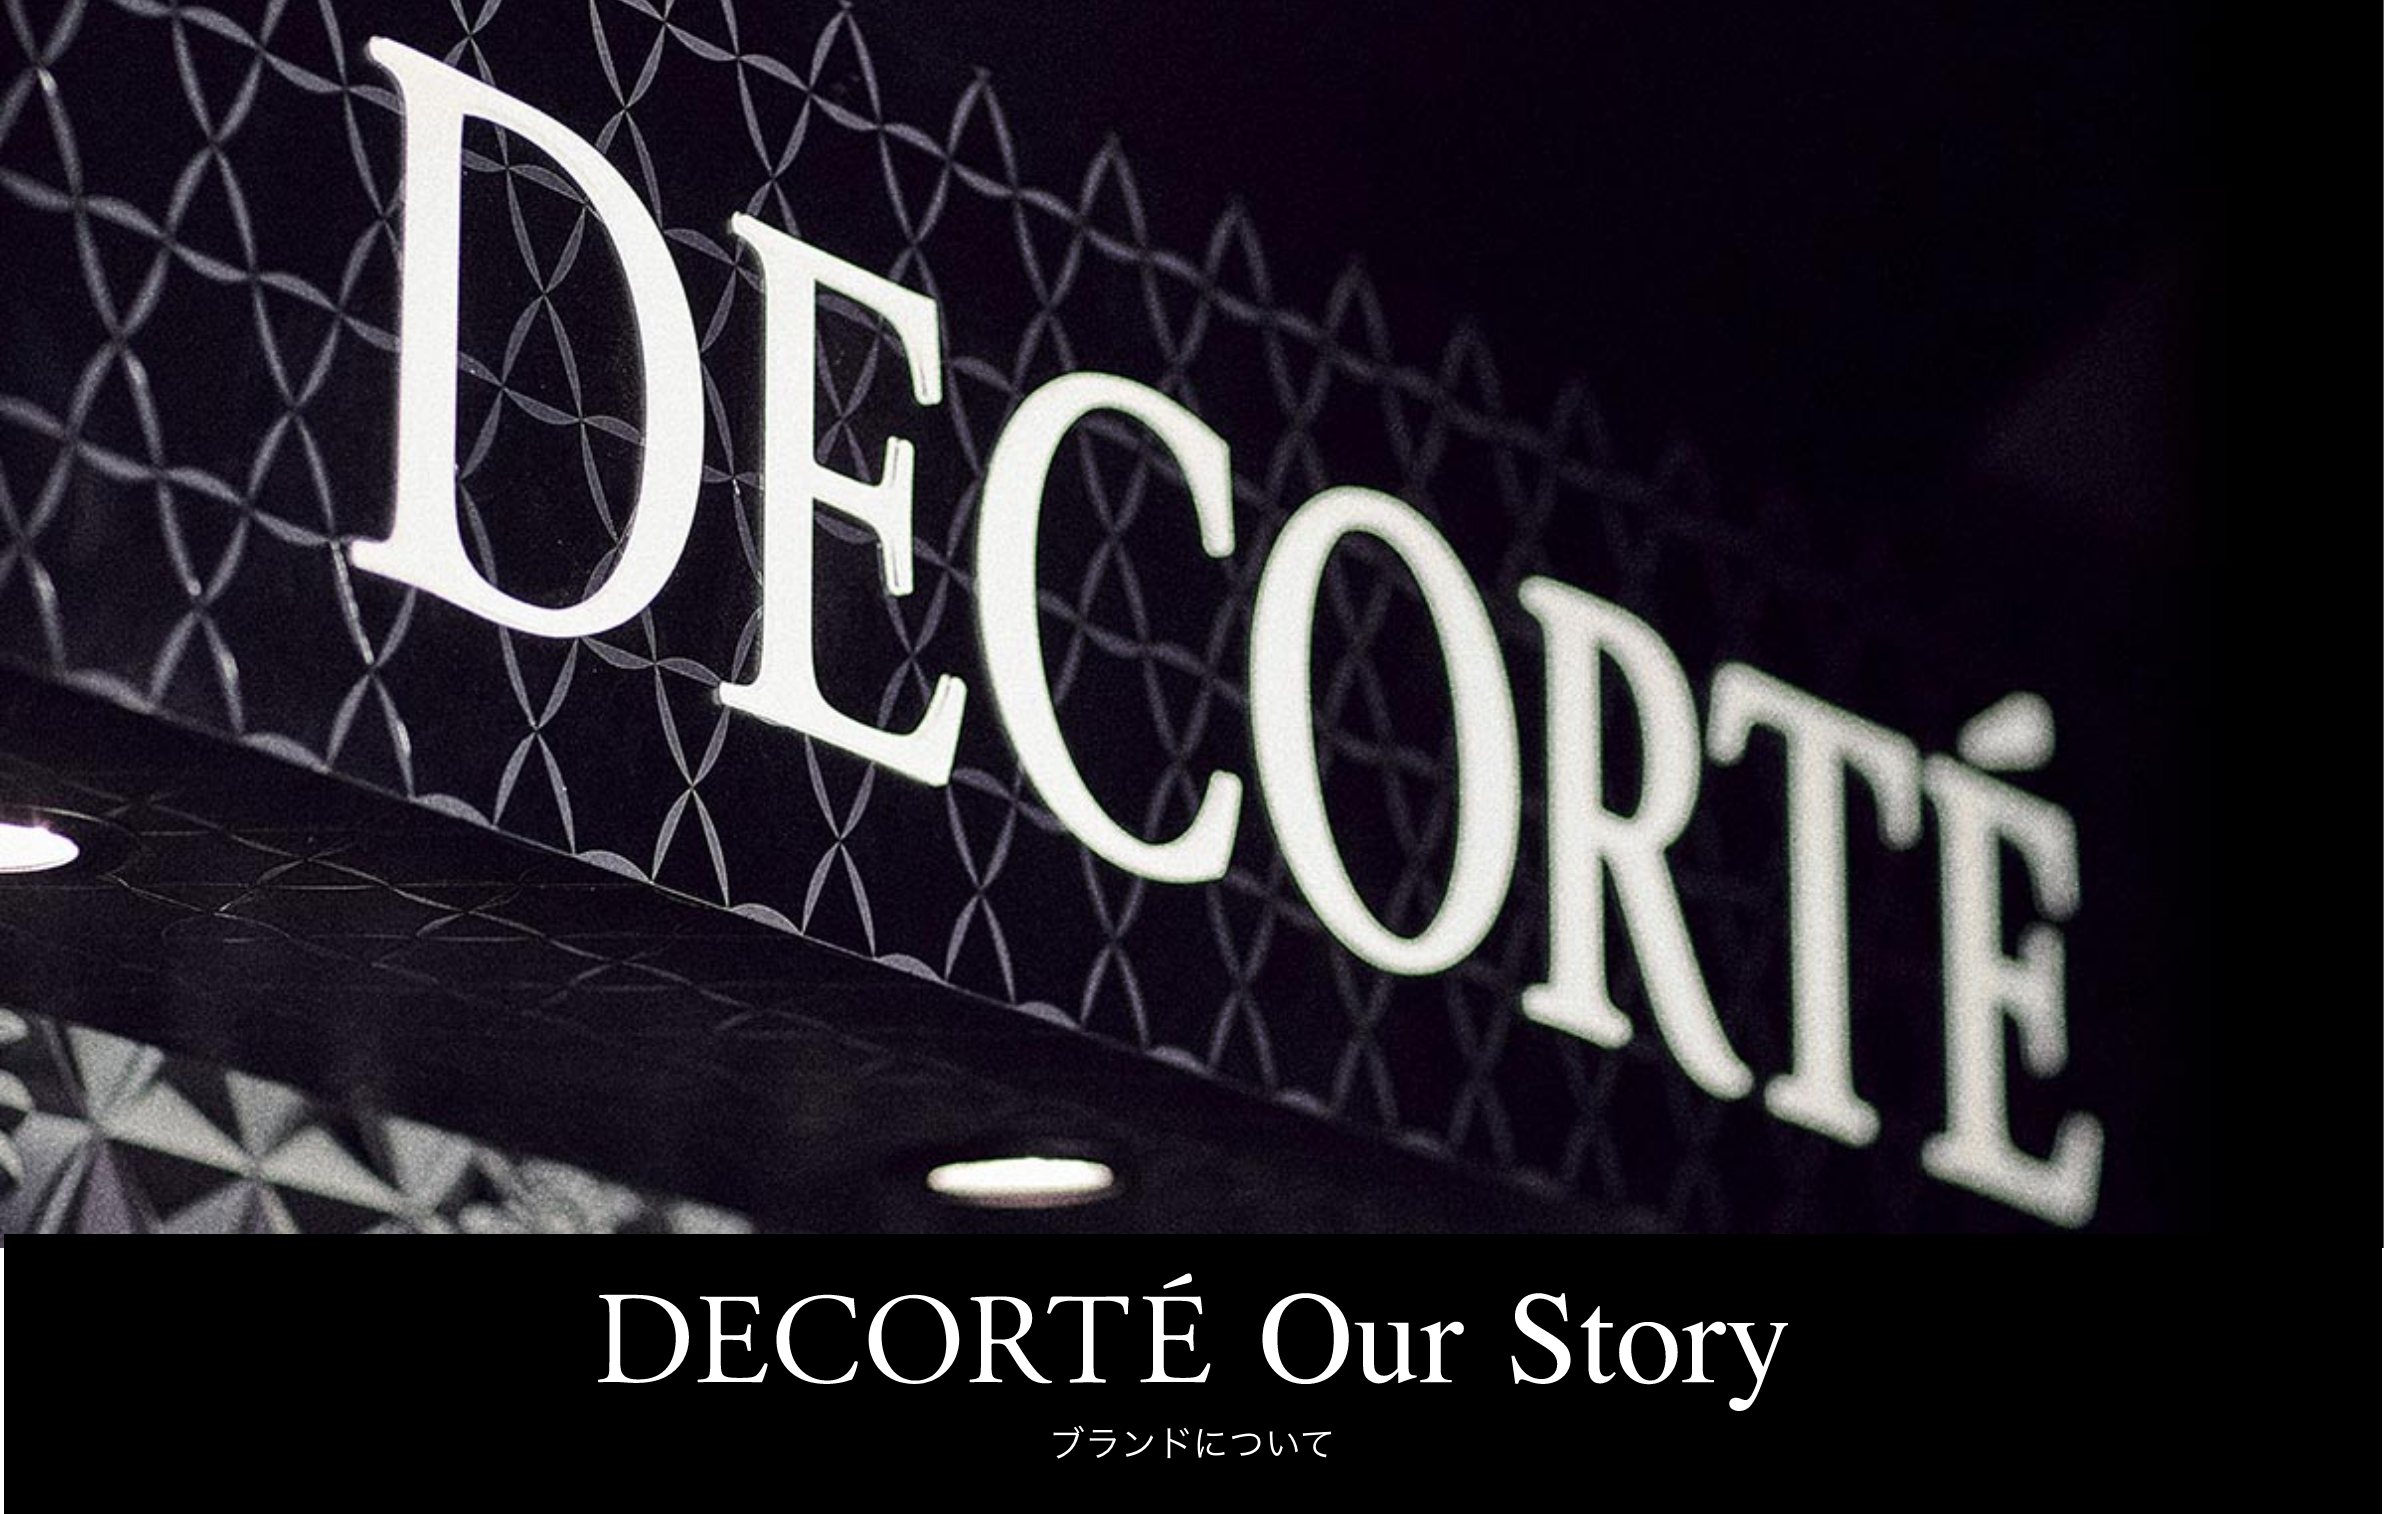 DECORTE Our Story